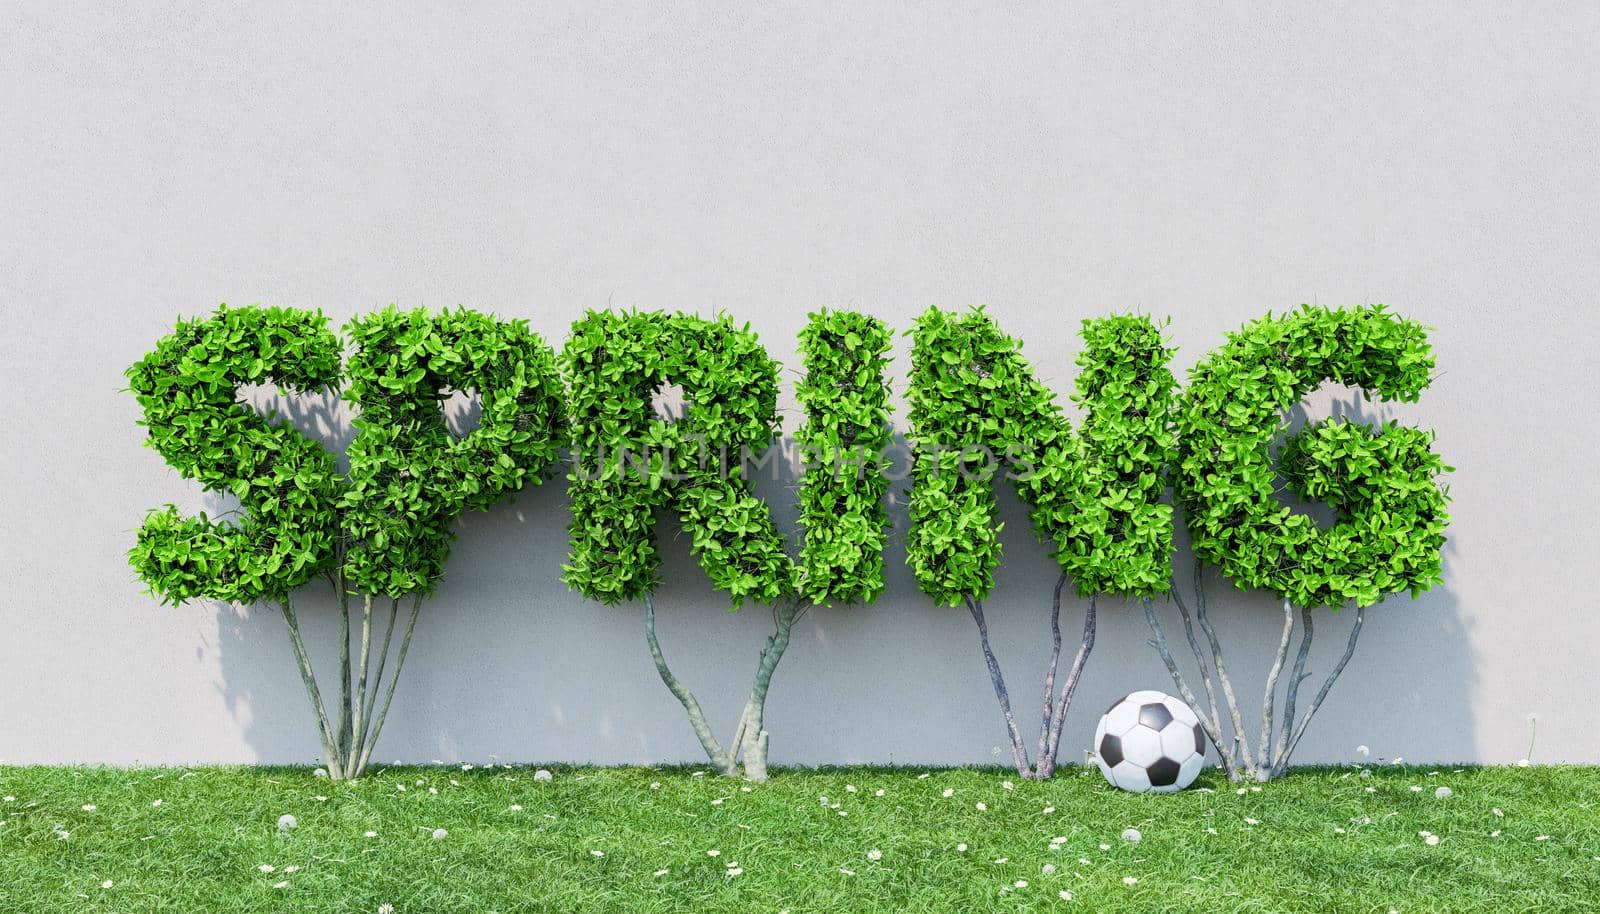 bushes sign with the word SPRING on grass and flowers with soccer ball. spring arrival concept. 3d rendering